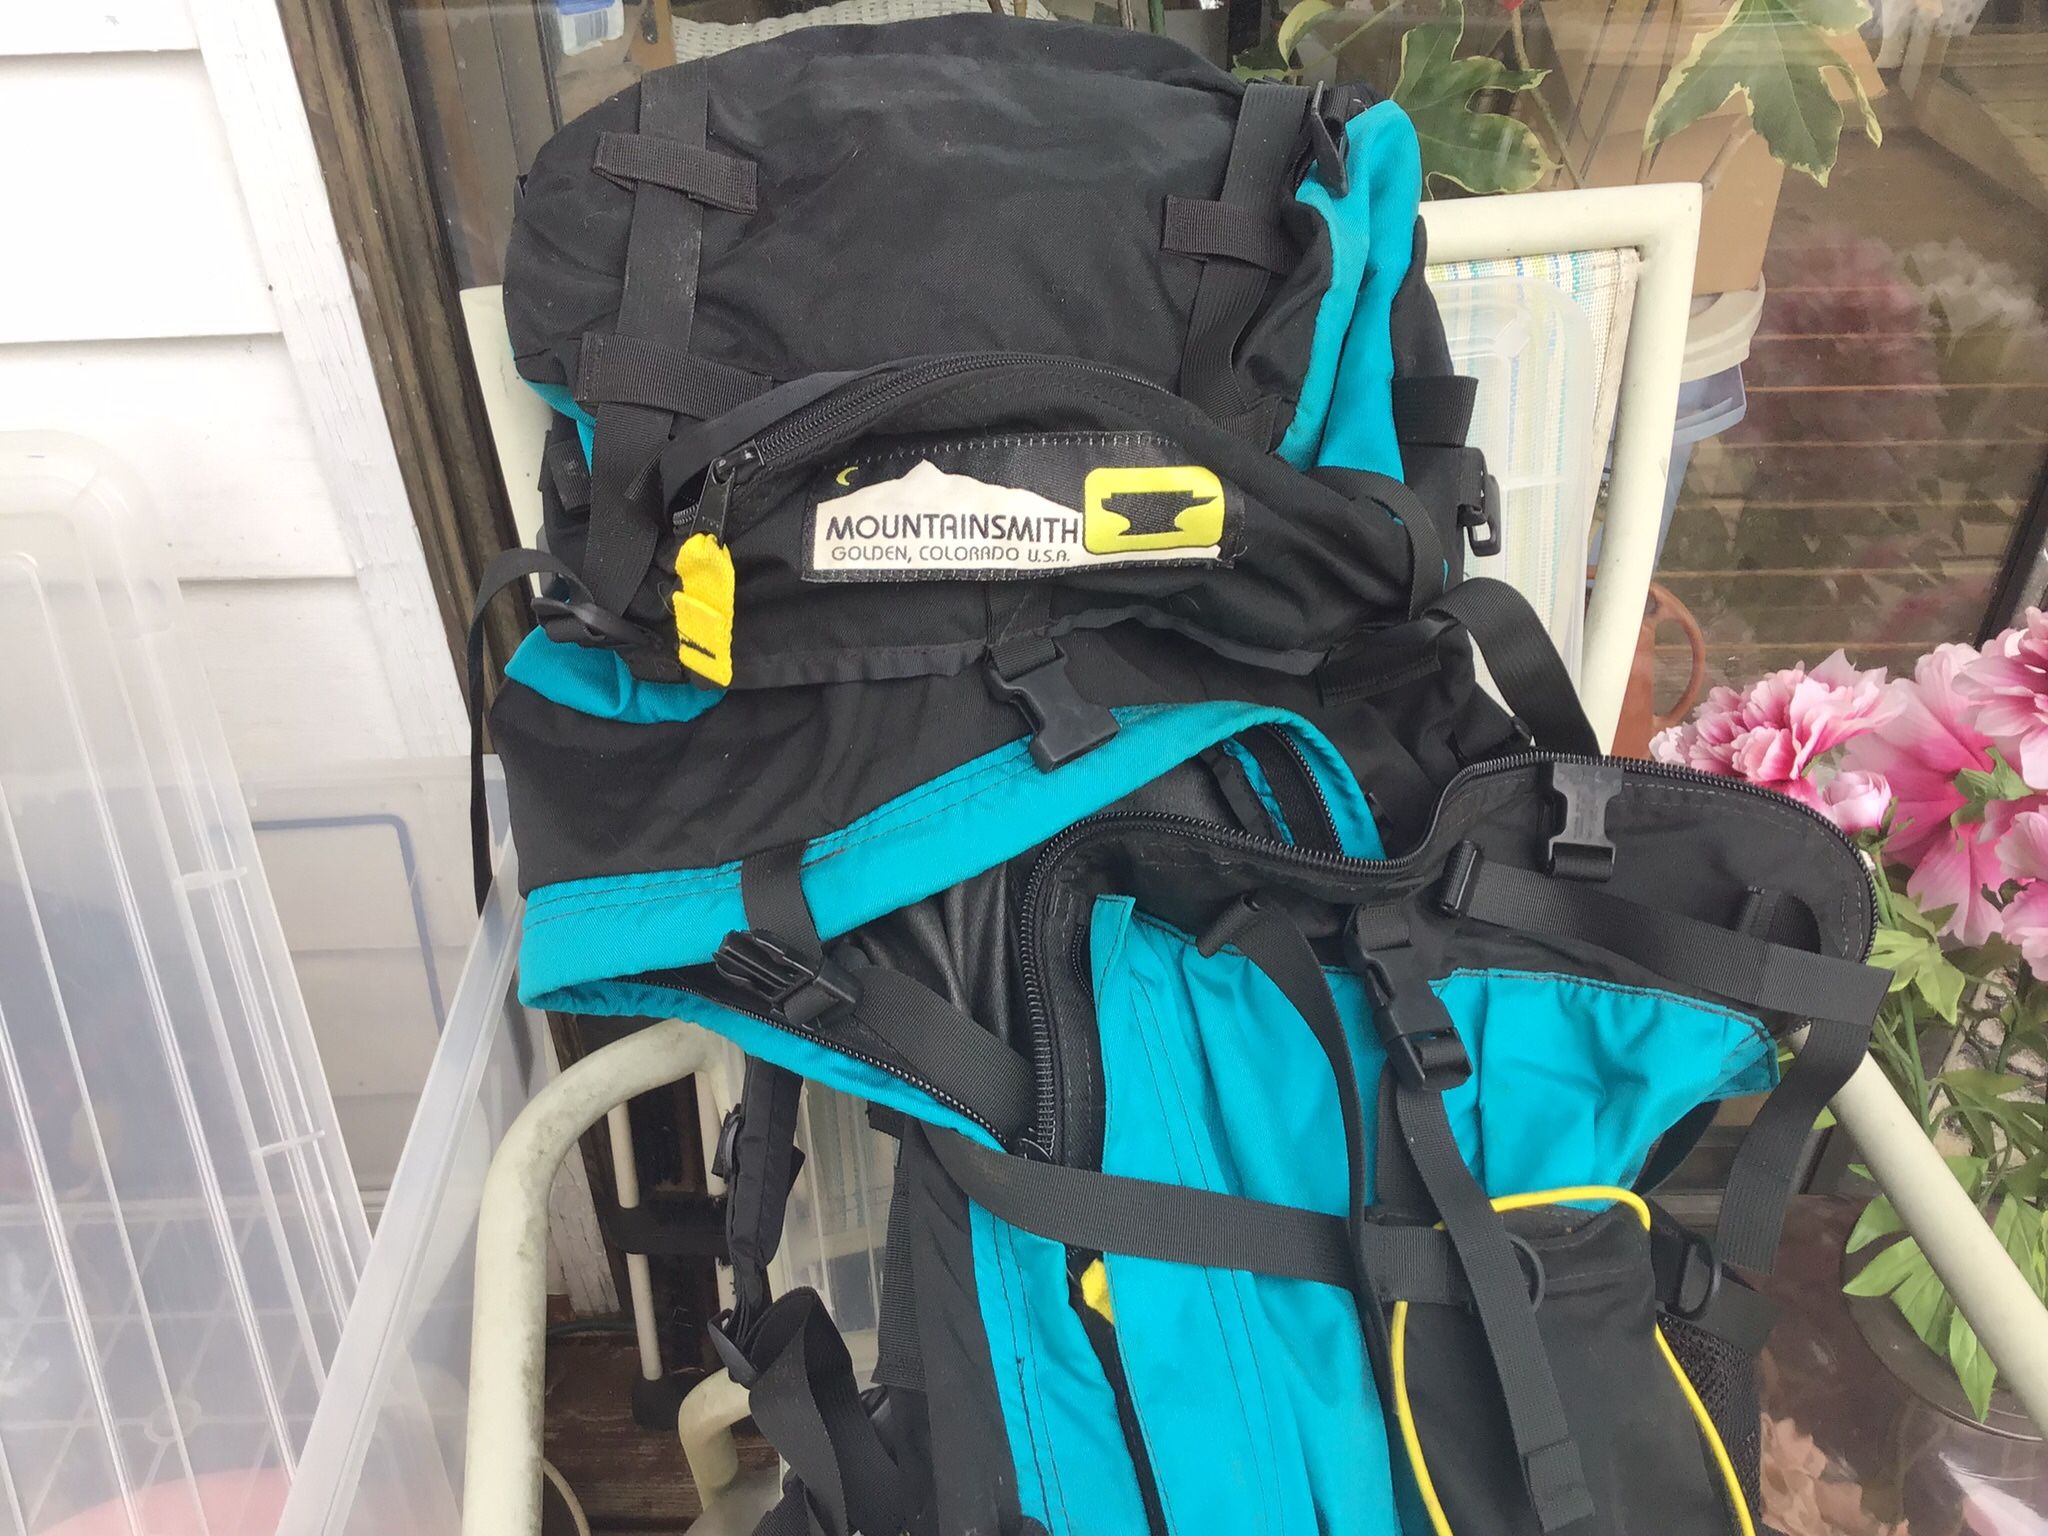 Mountain smith Back Packing Pack